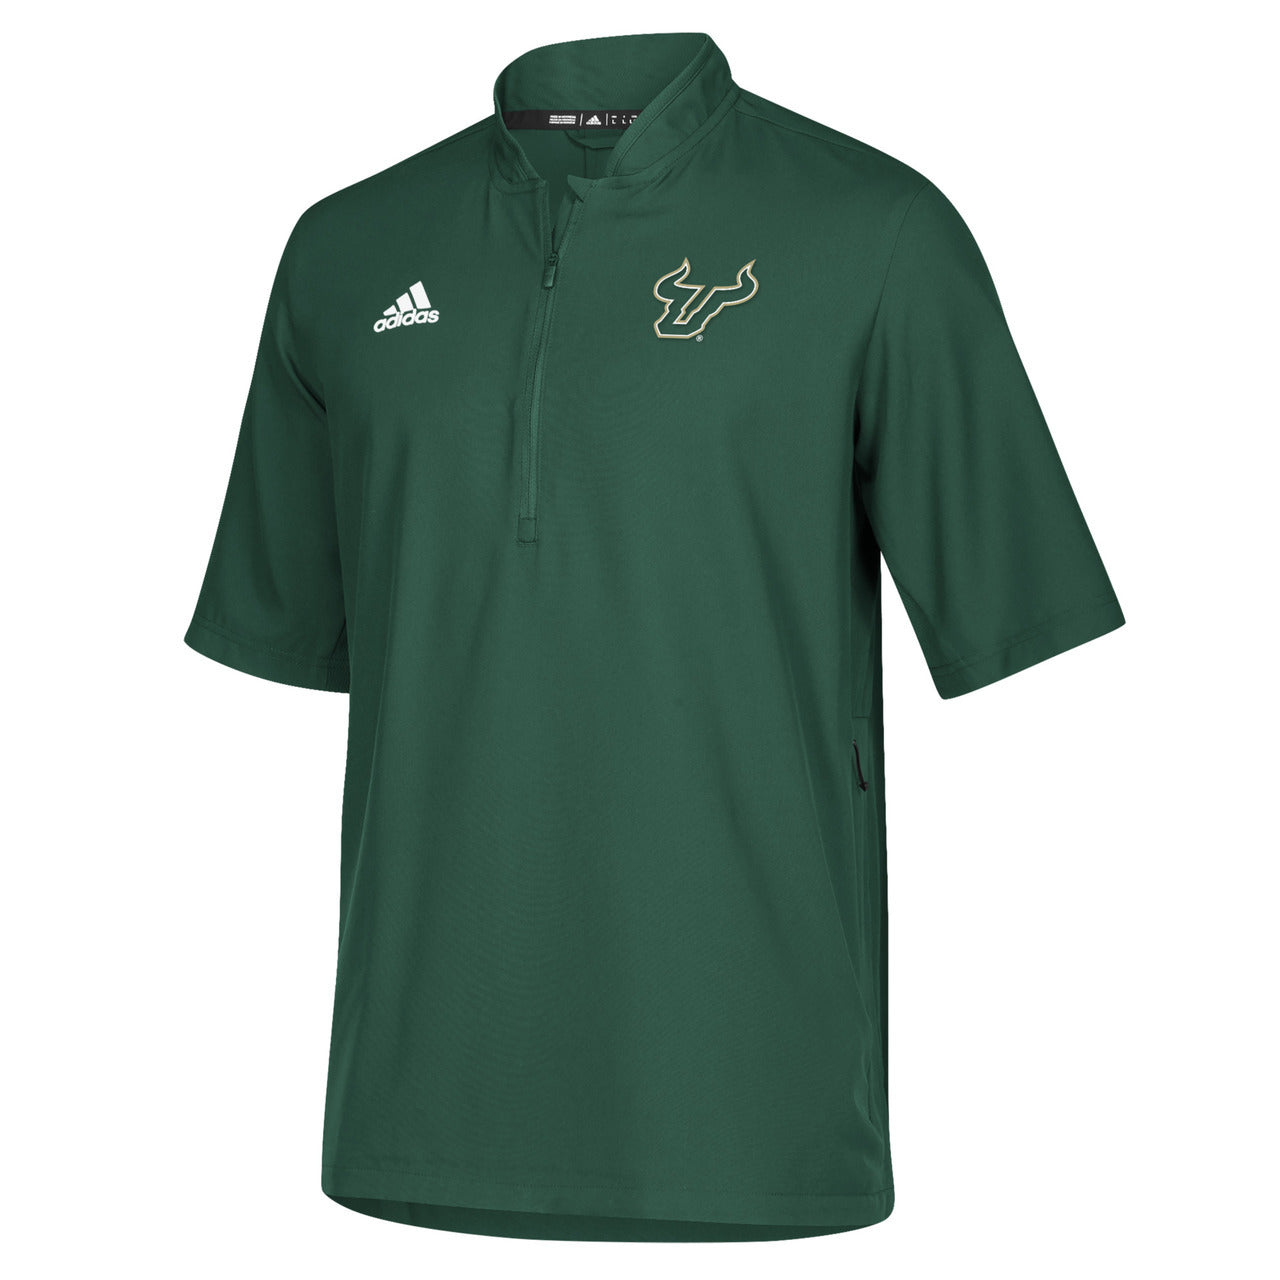 Men's USF Bulls Adidas Official Sideline Iconic 1/4 Zip